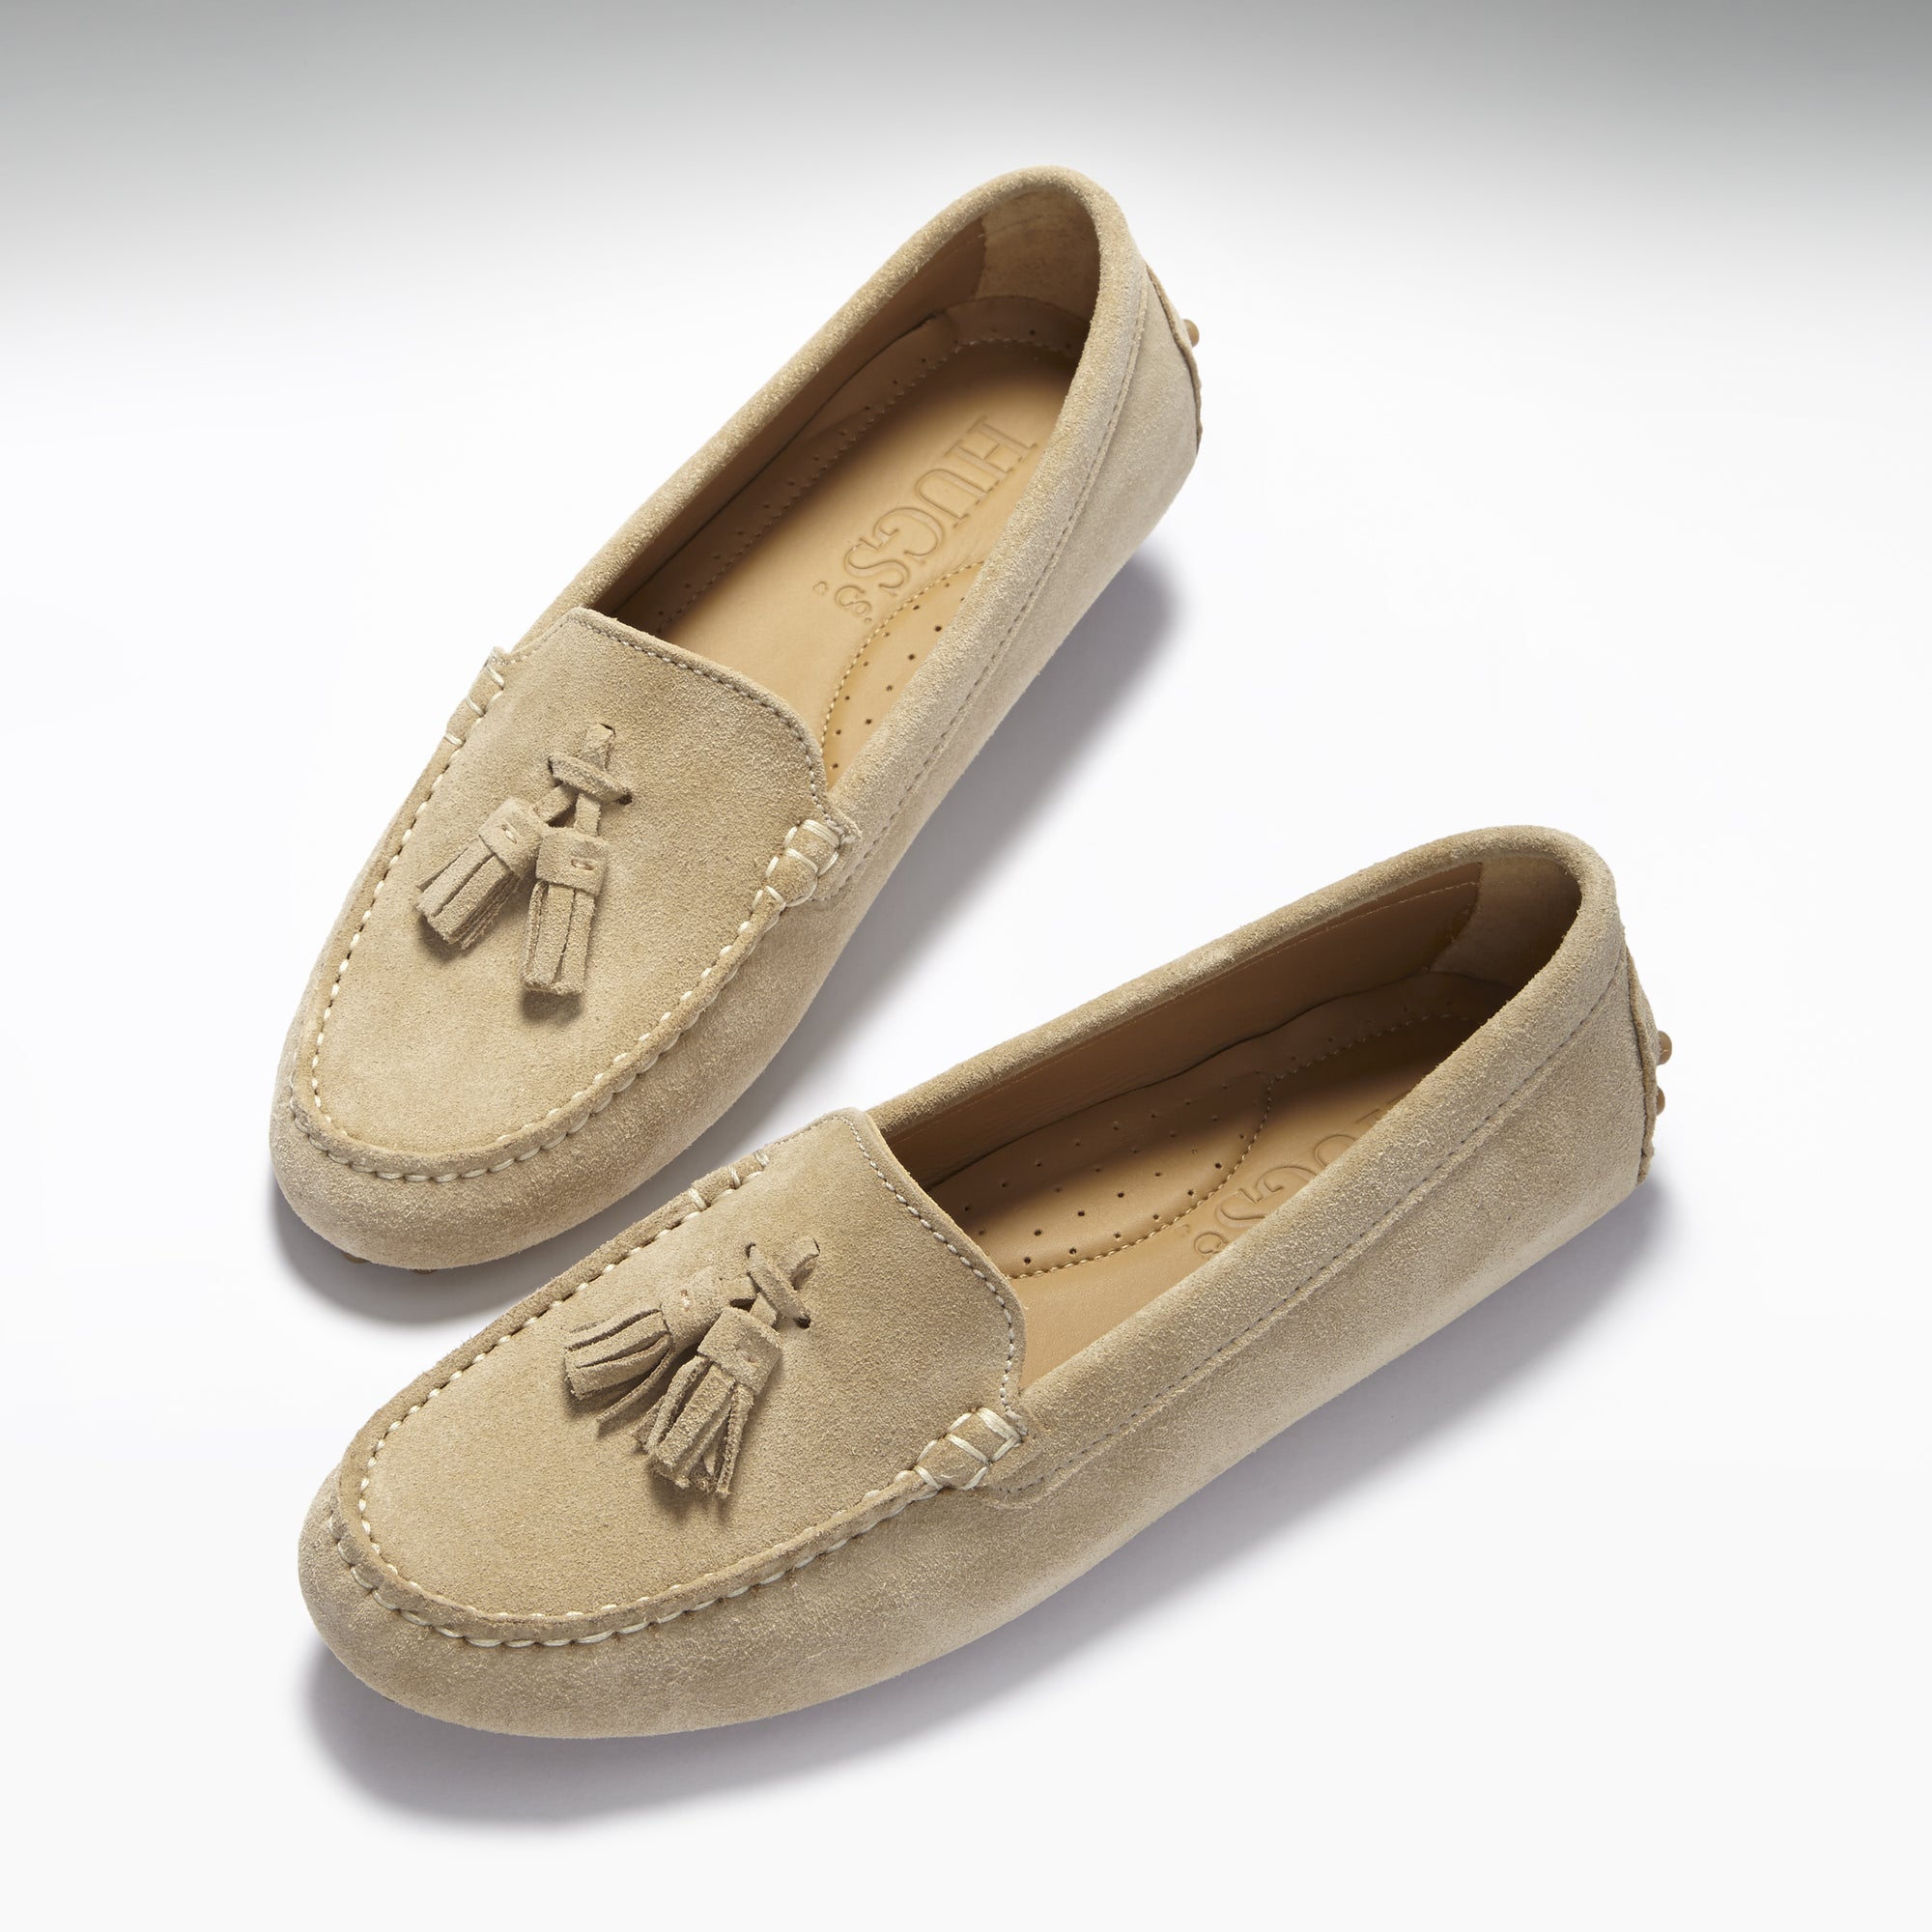 Women's Driving Loafer, Tasselled Taupe Suede